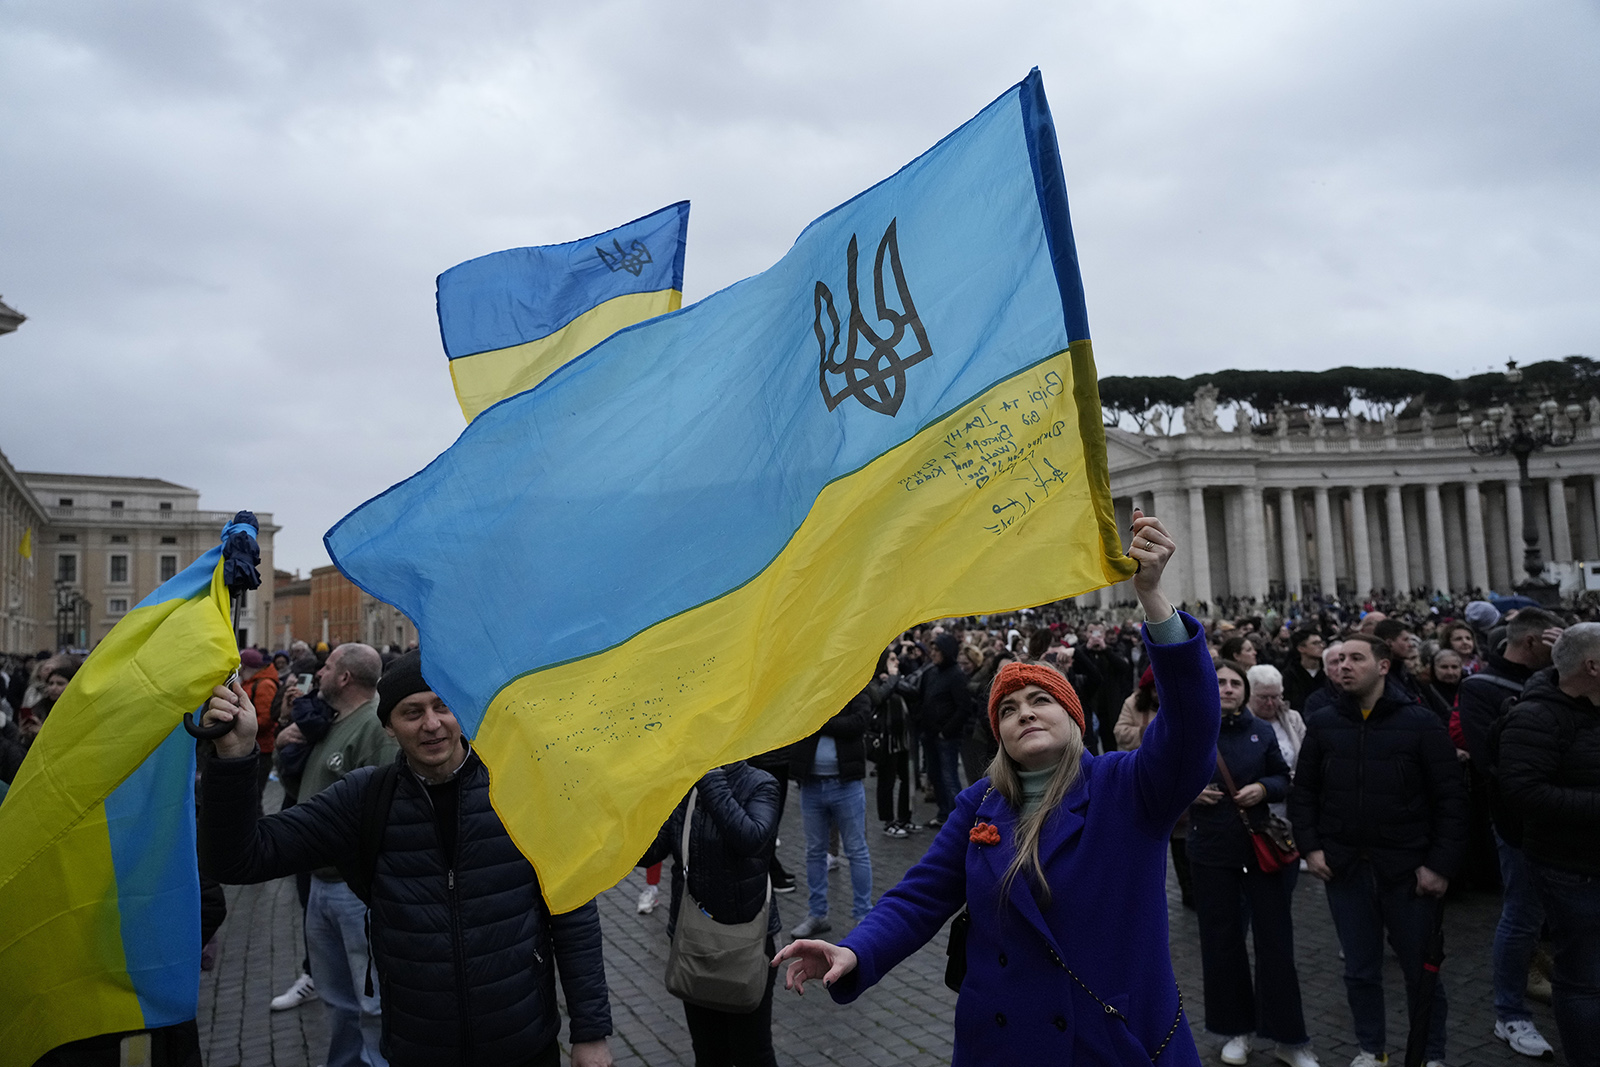 For Pope Francis and Vatican diplomats, peace in Ukraine more important than ideology